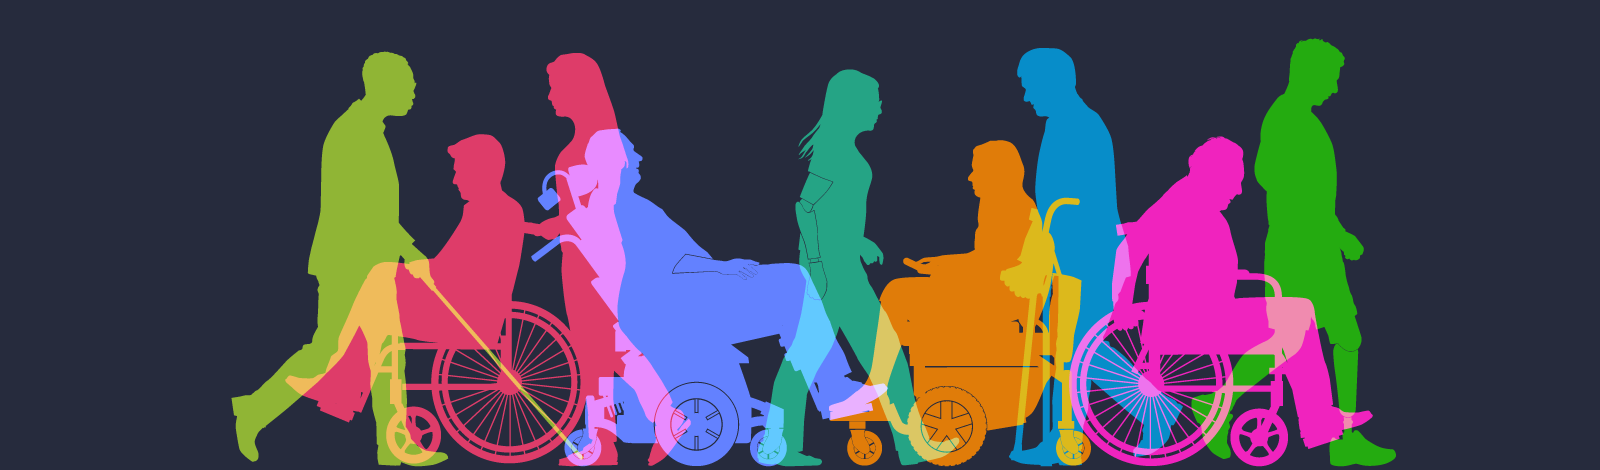 Graphic of people with different disabilities shown in wheelchairs and using canes